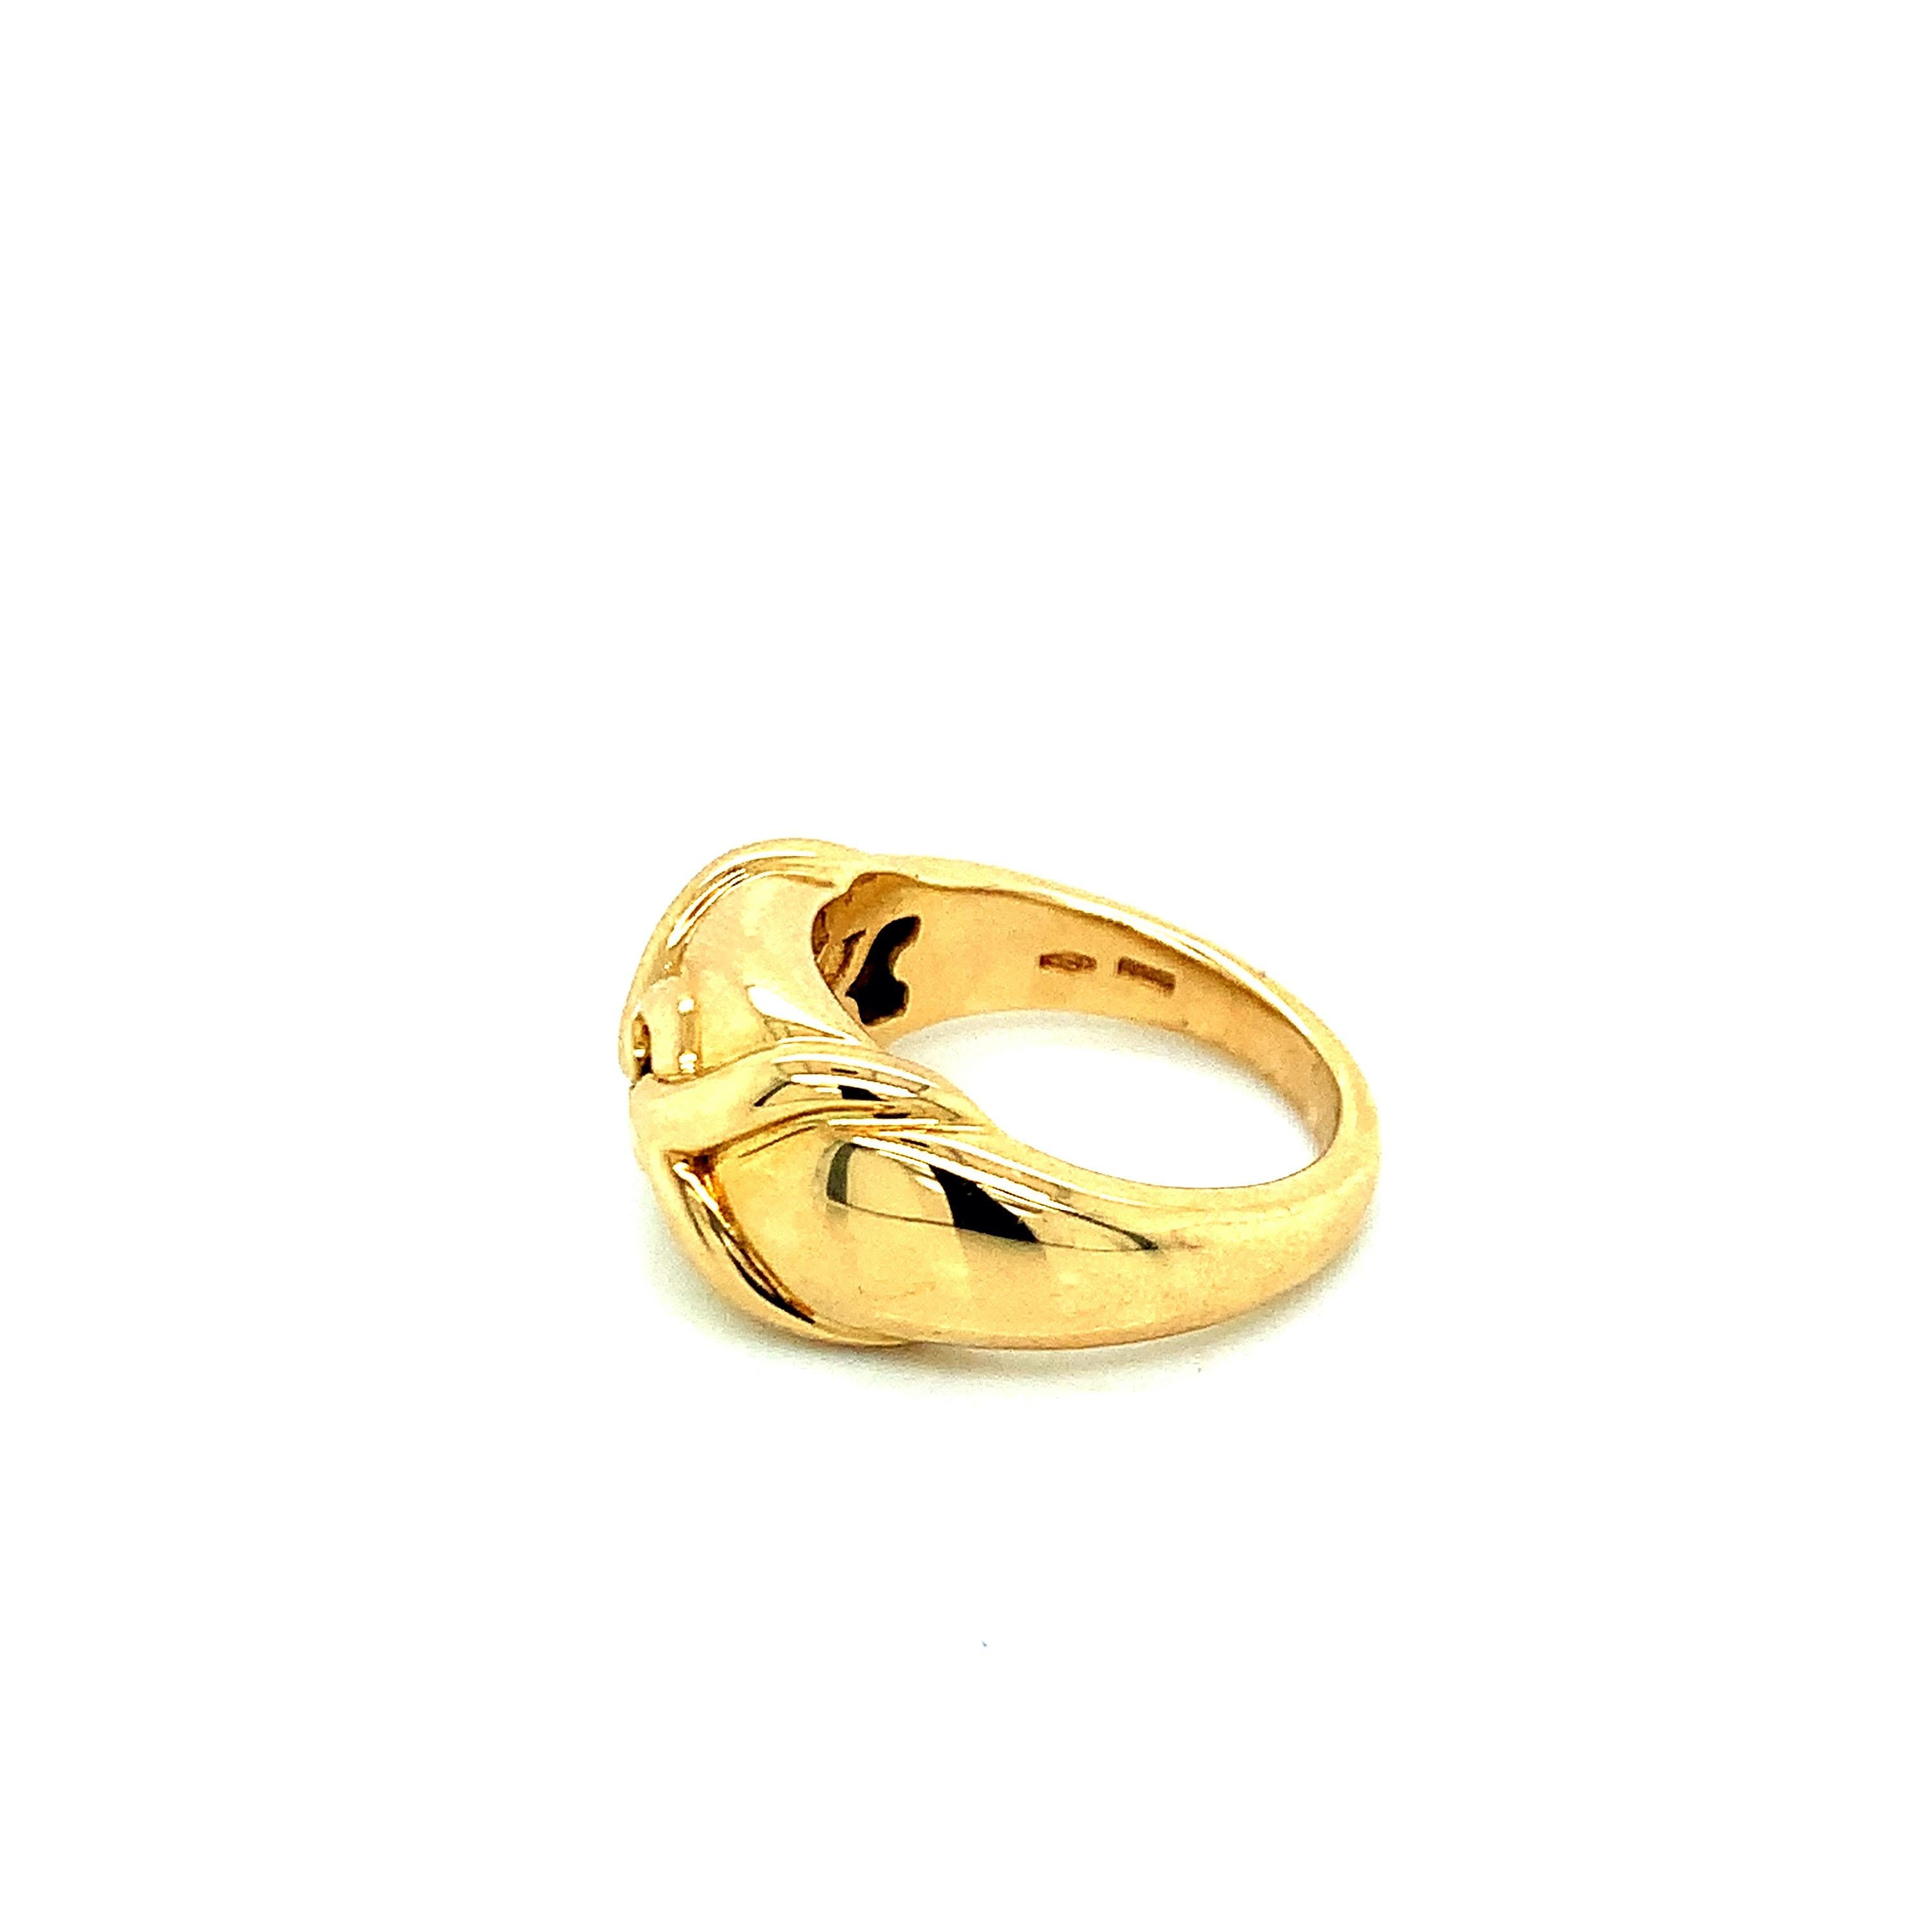 An 18 karat yellow gold ring created by Bvlgari. Total weight: 12.2 grams. Size 6.25. 